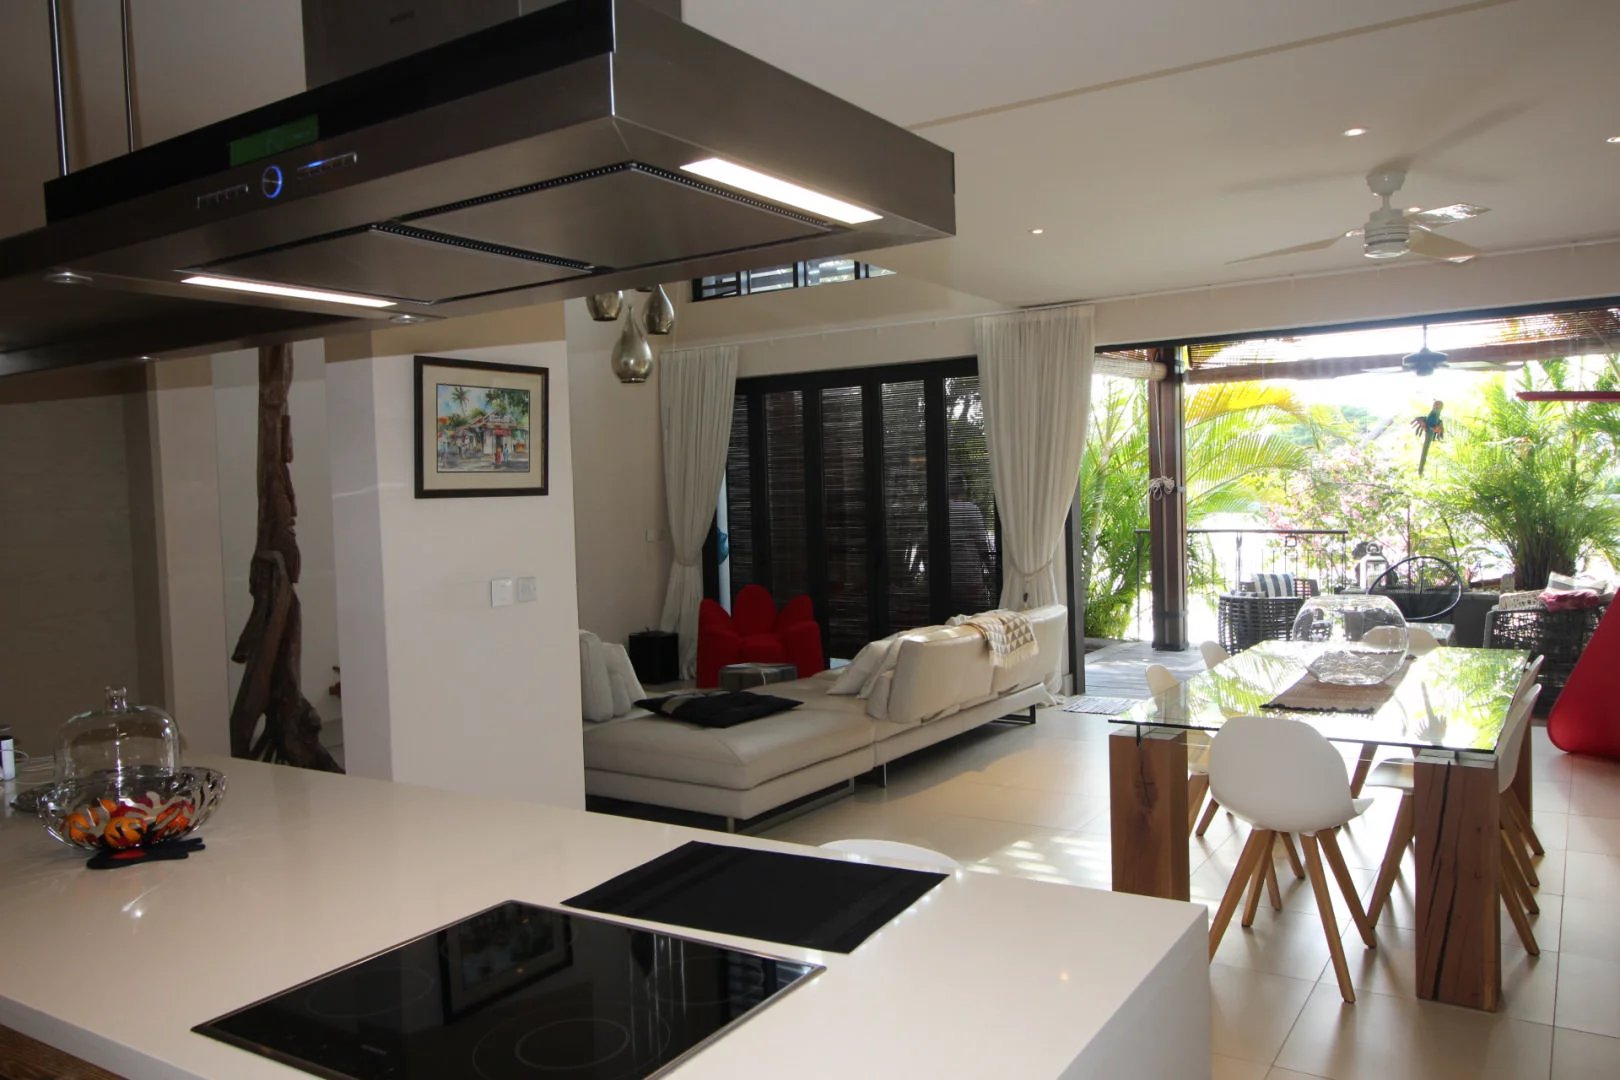 RIVIÈRE NOIRE - Contemporary IRS duplex in the marina – 3 bedrooms - picture 7 title=